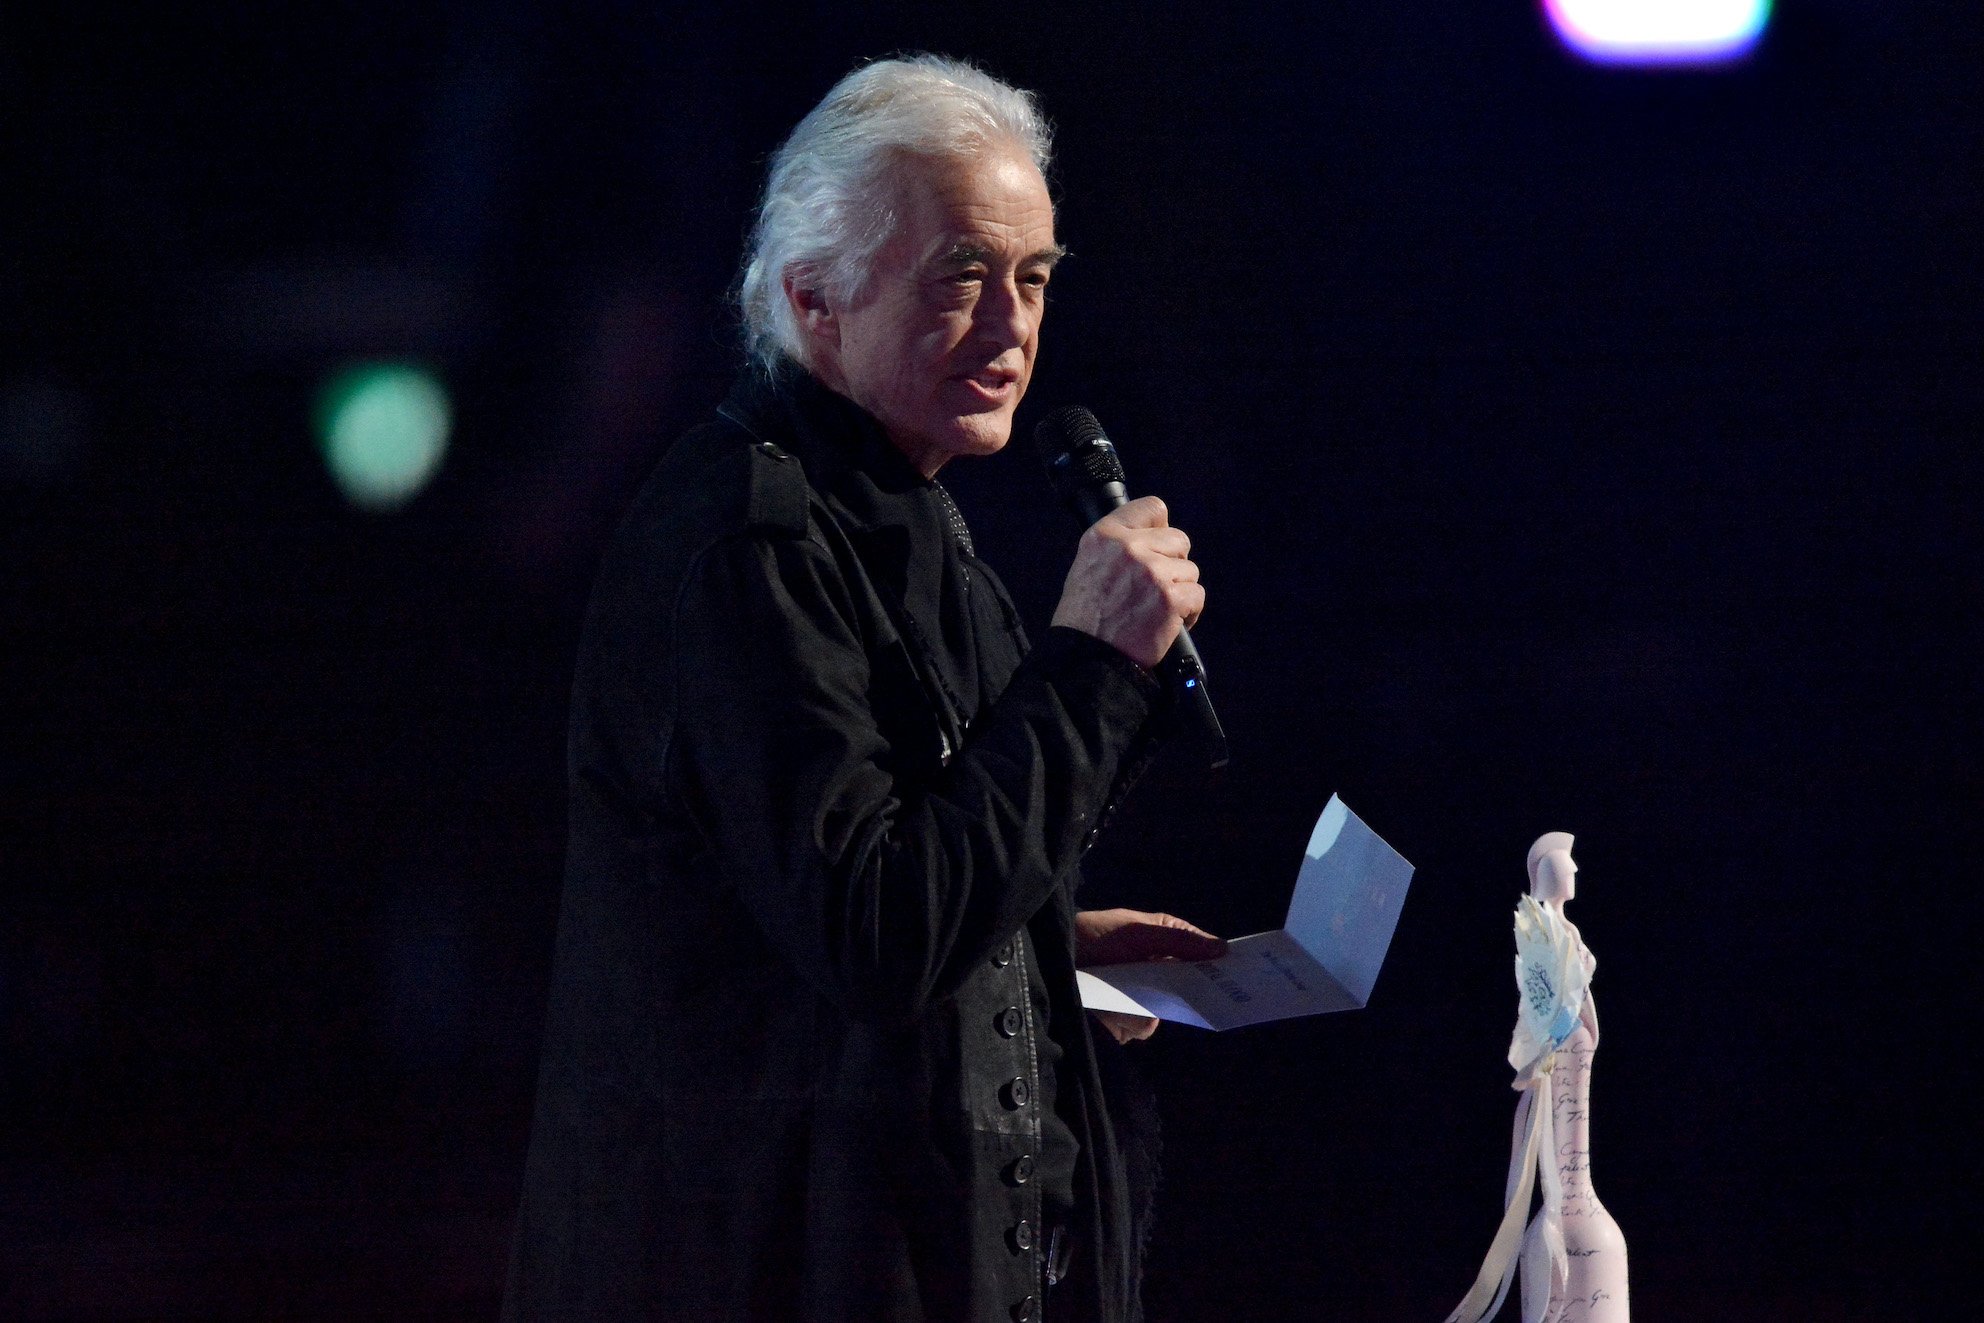 Jimmy Page speaks on stage at the 2015 BRIT Awards